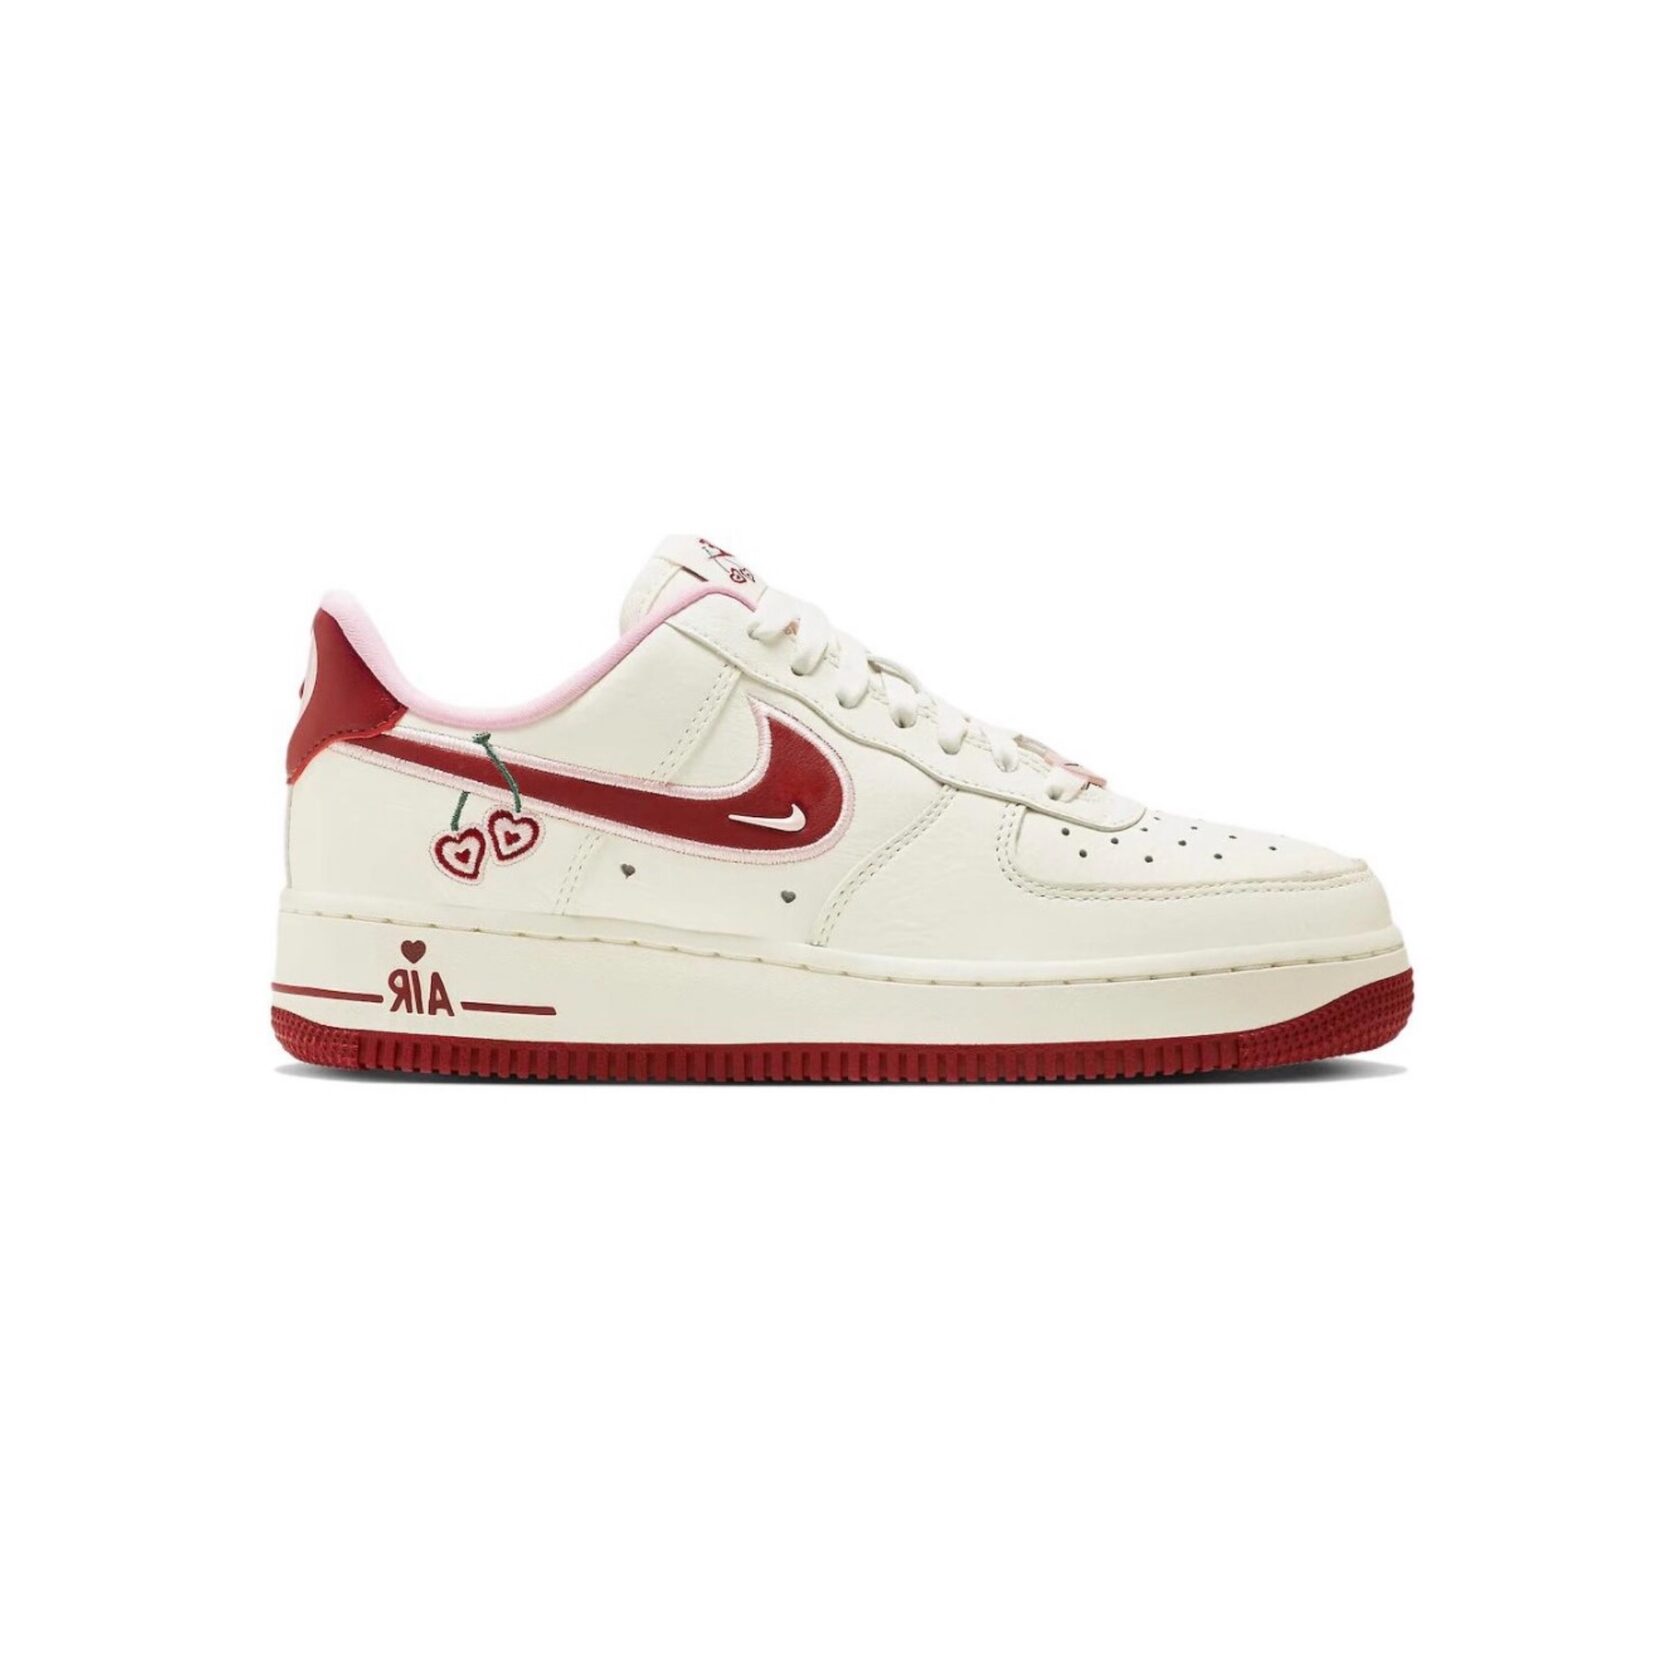 Air force valentines day. Nike Air Force 1 Low “Valentine’s Day” 2023. Nike Air Force 1 Low Valentines Day. Nike Air Force 1 Low Retro. Nike Air Force 1 Valentines Day.